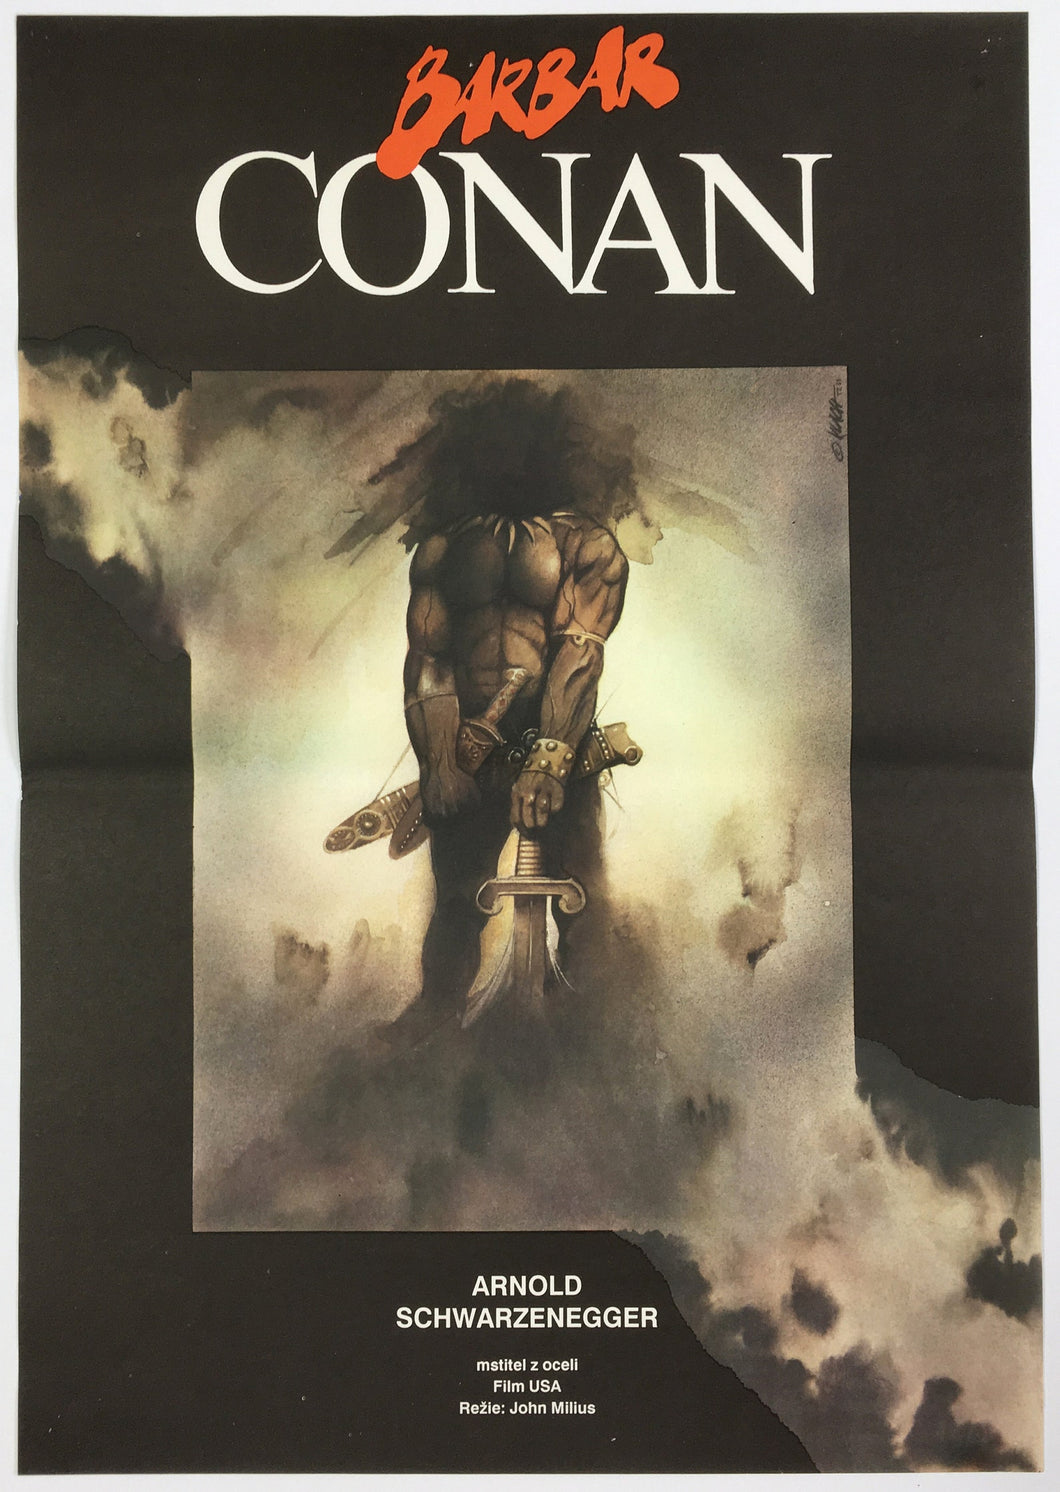 Image of Conan the Barbarian and sword - Czech Poster Gallery